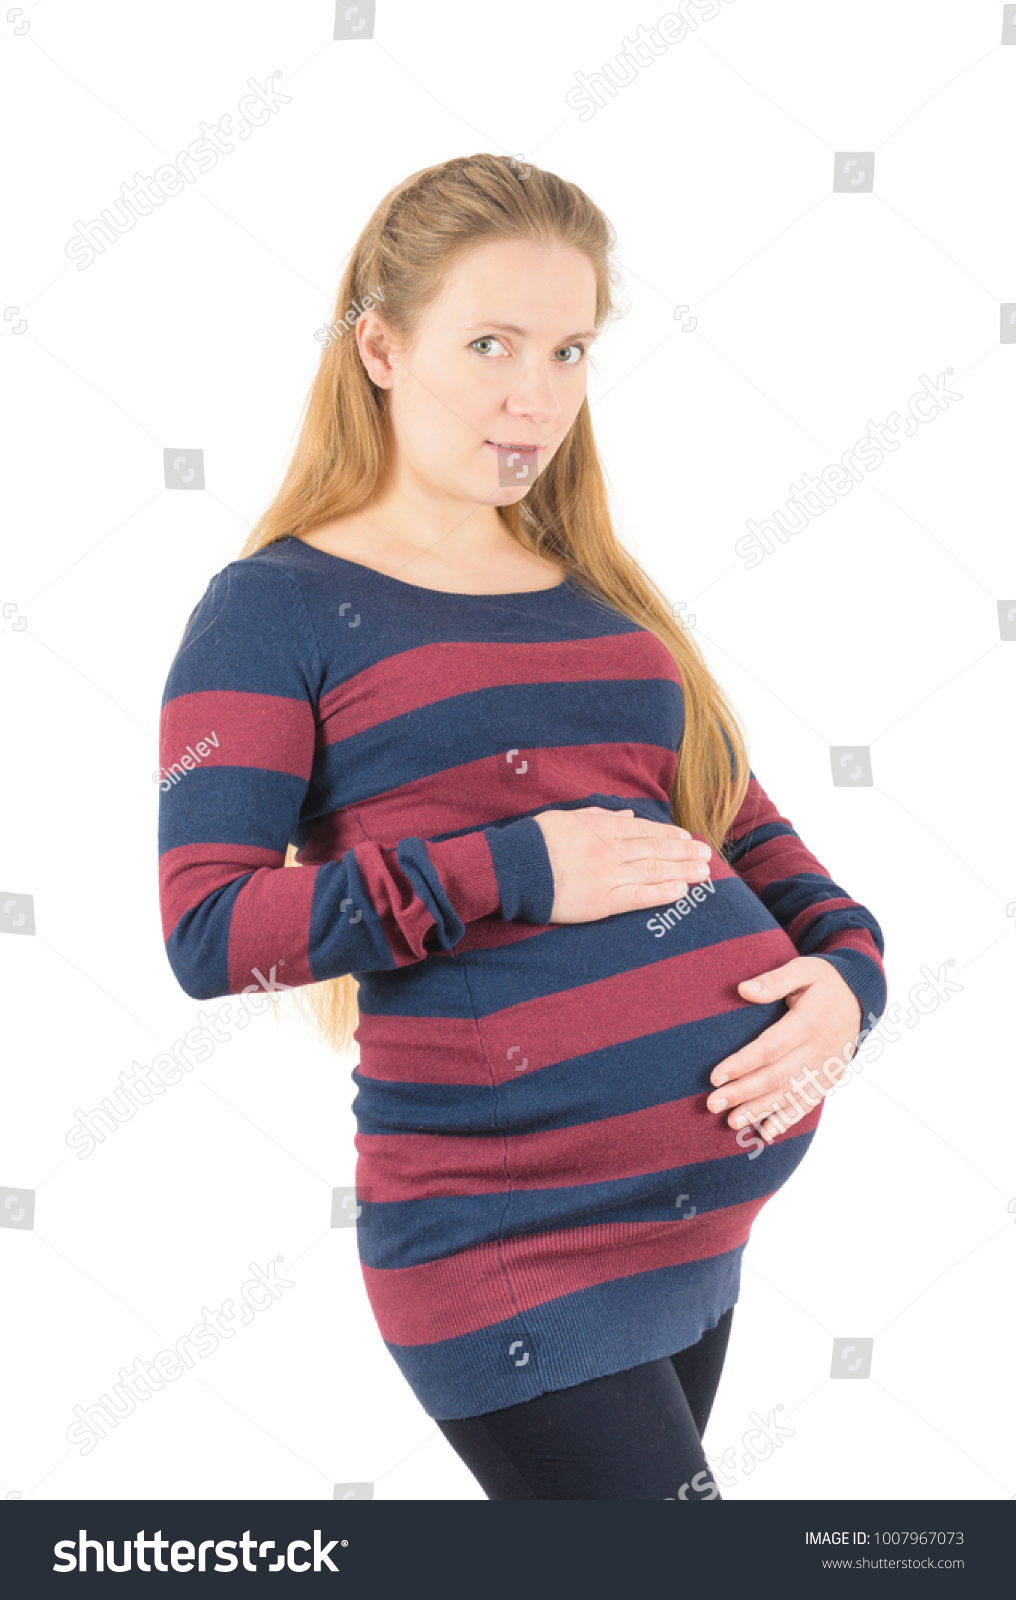 Girl with huge belly